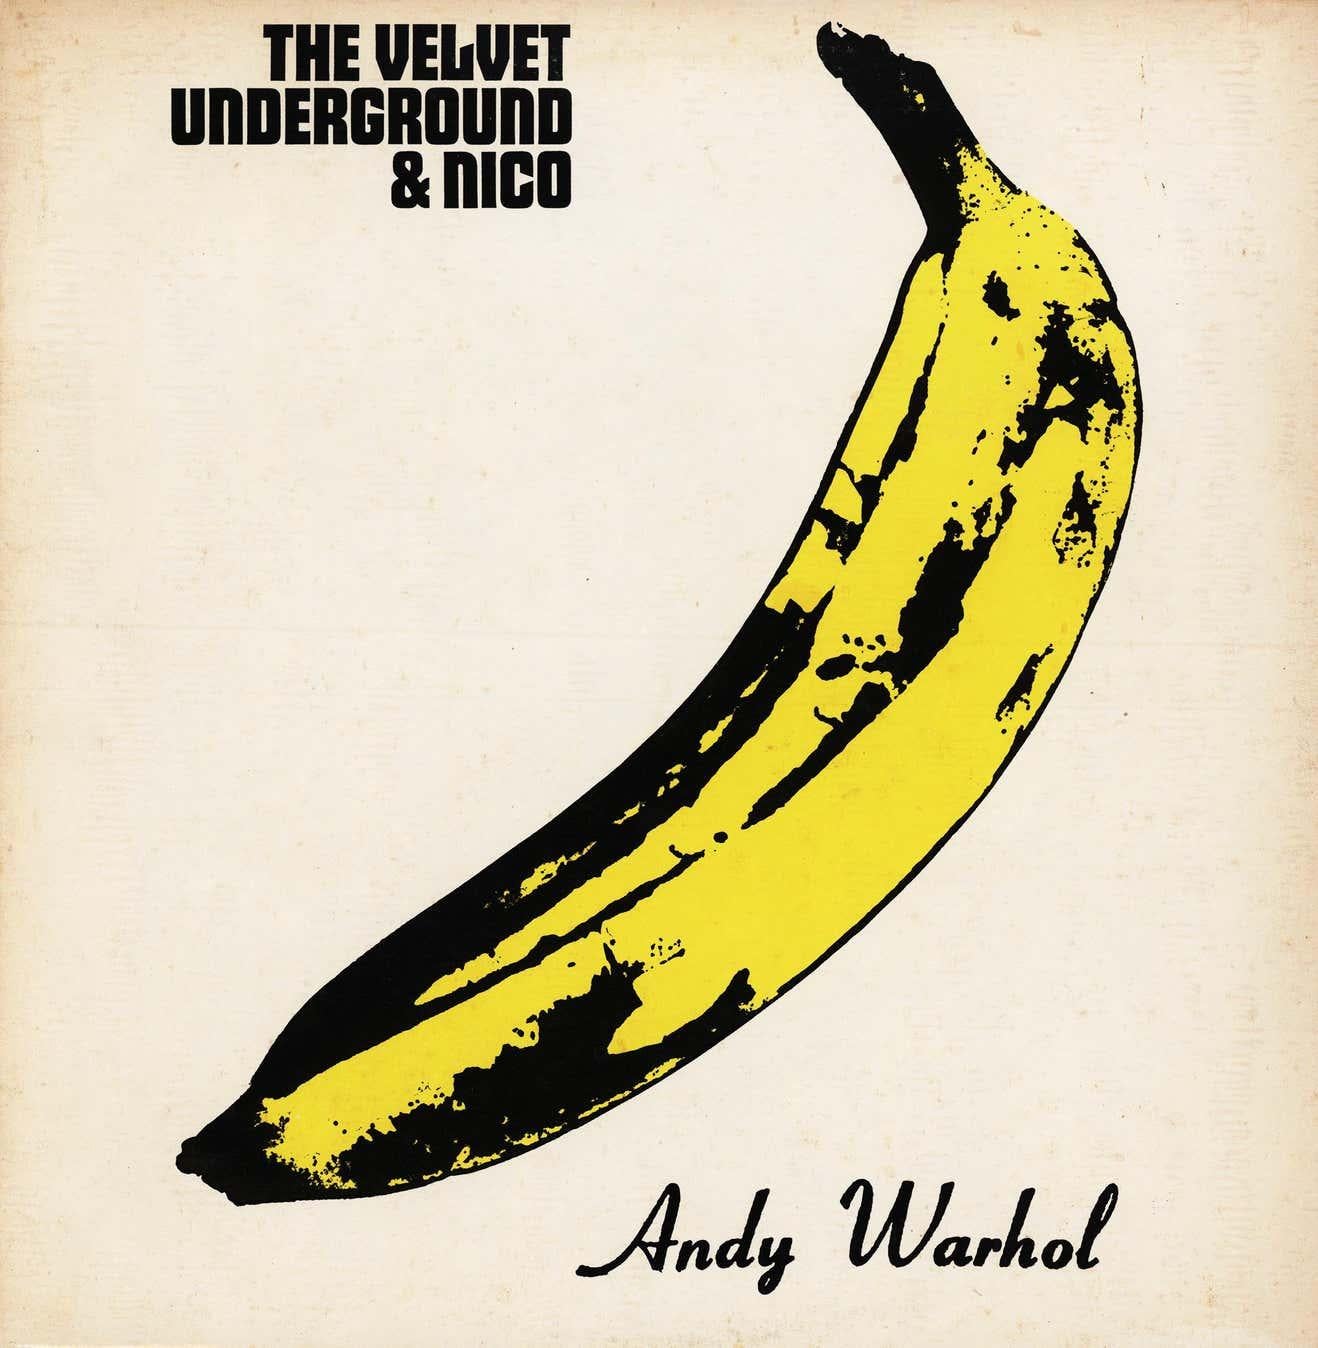 Andy Warhol Banana Cover Art:
The Velvet Underground & Nico Vinyl Record circa early 1980's featuring cover art by Andy Warhol. A rare impression in very good to excellent condition. 

Medium: Off Set Lithograph on record sleeve
Dimensions: 12 x 12